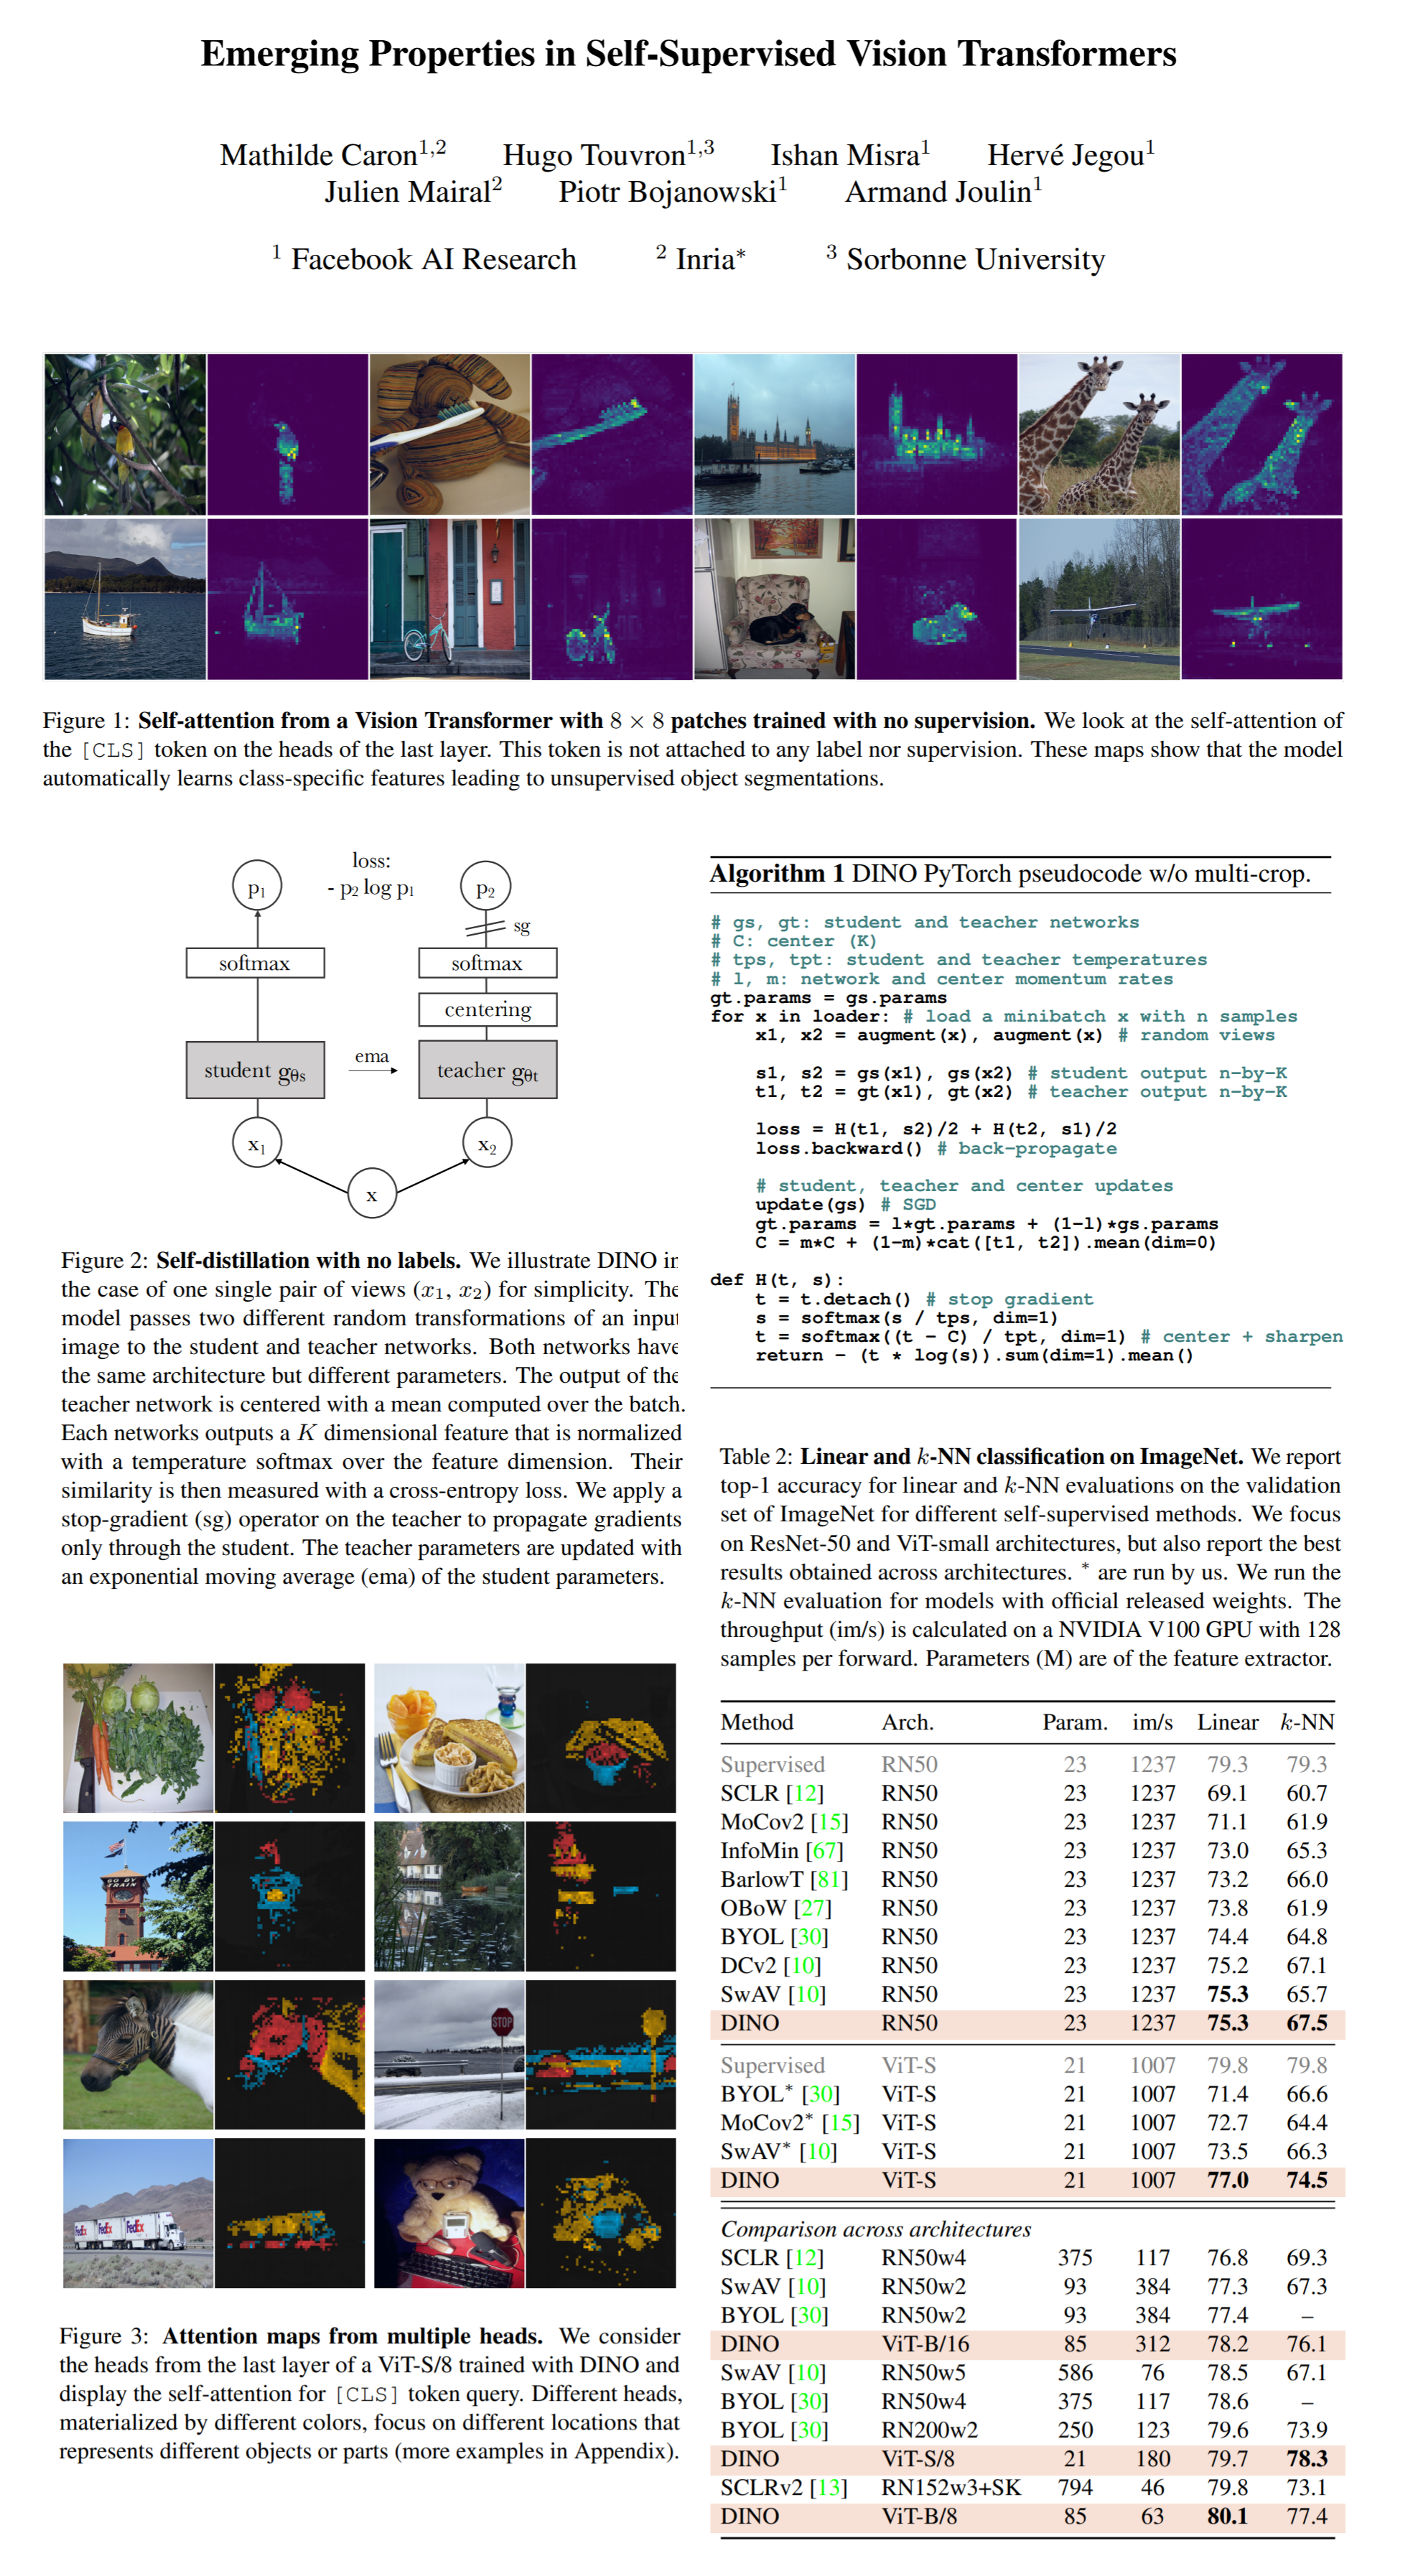 Emerging Properties in Self-Supervised Vision Transformers paper poster